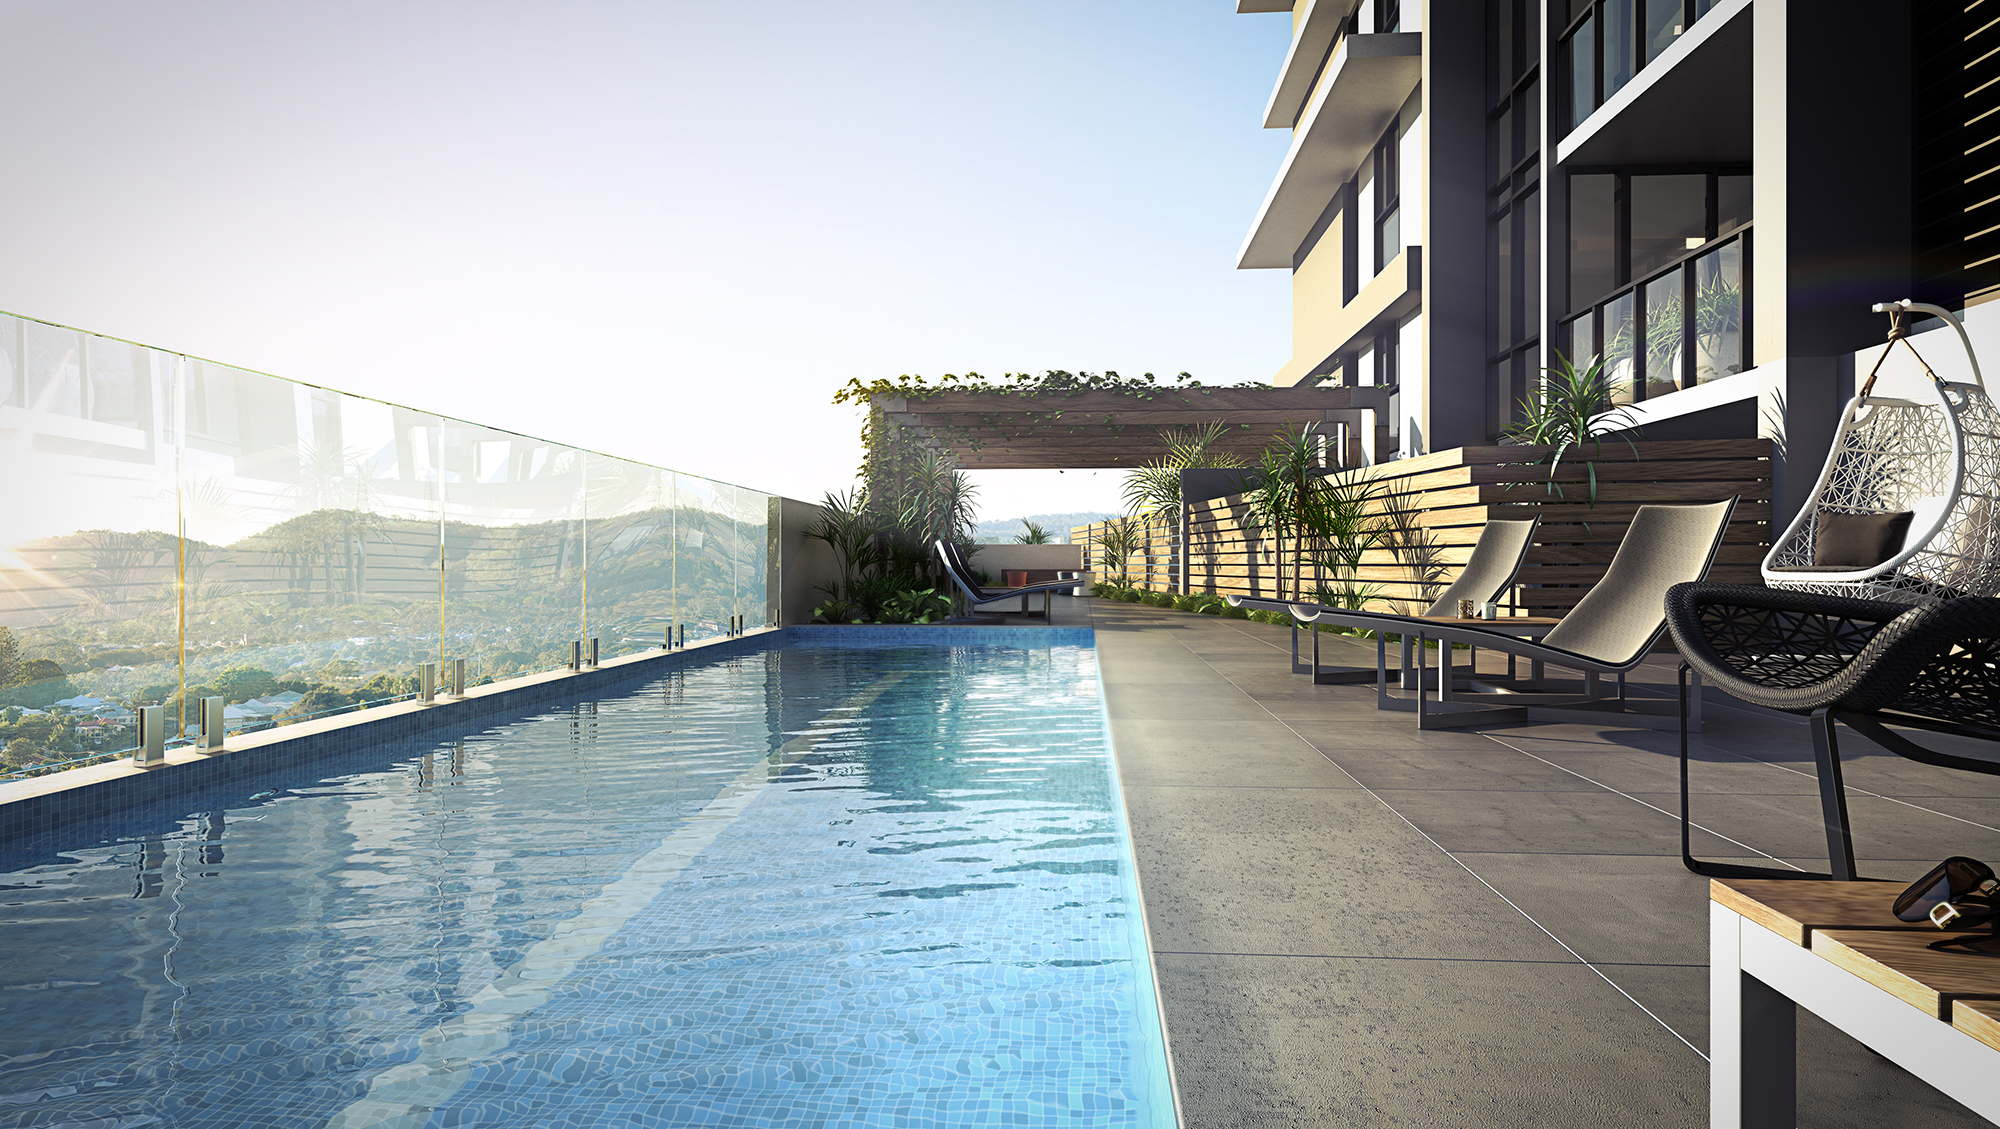 Rooftop pool area with breathtaking views of the Brisbane hinterlands, featuring lush planting, comfortable lounge chairs, and a pergola adorned with beautiful crawling vines.